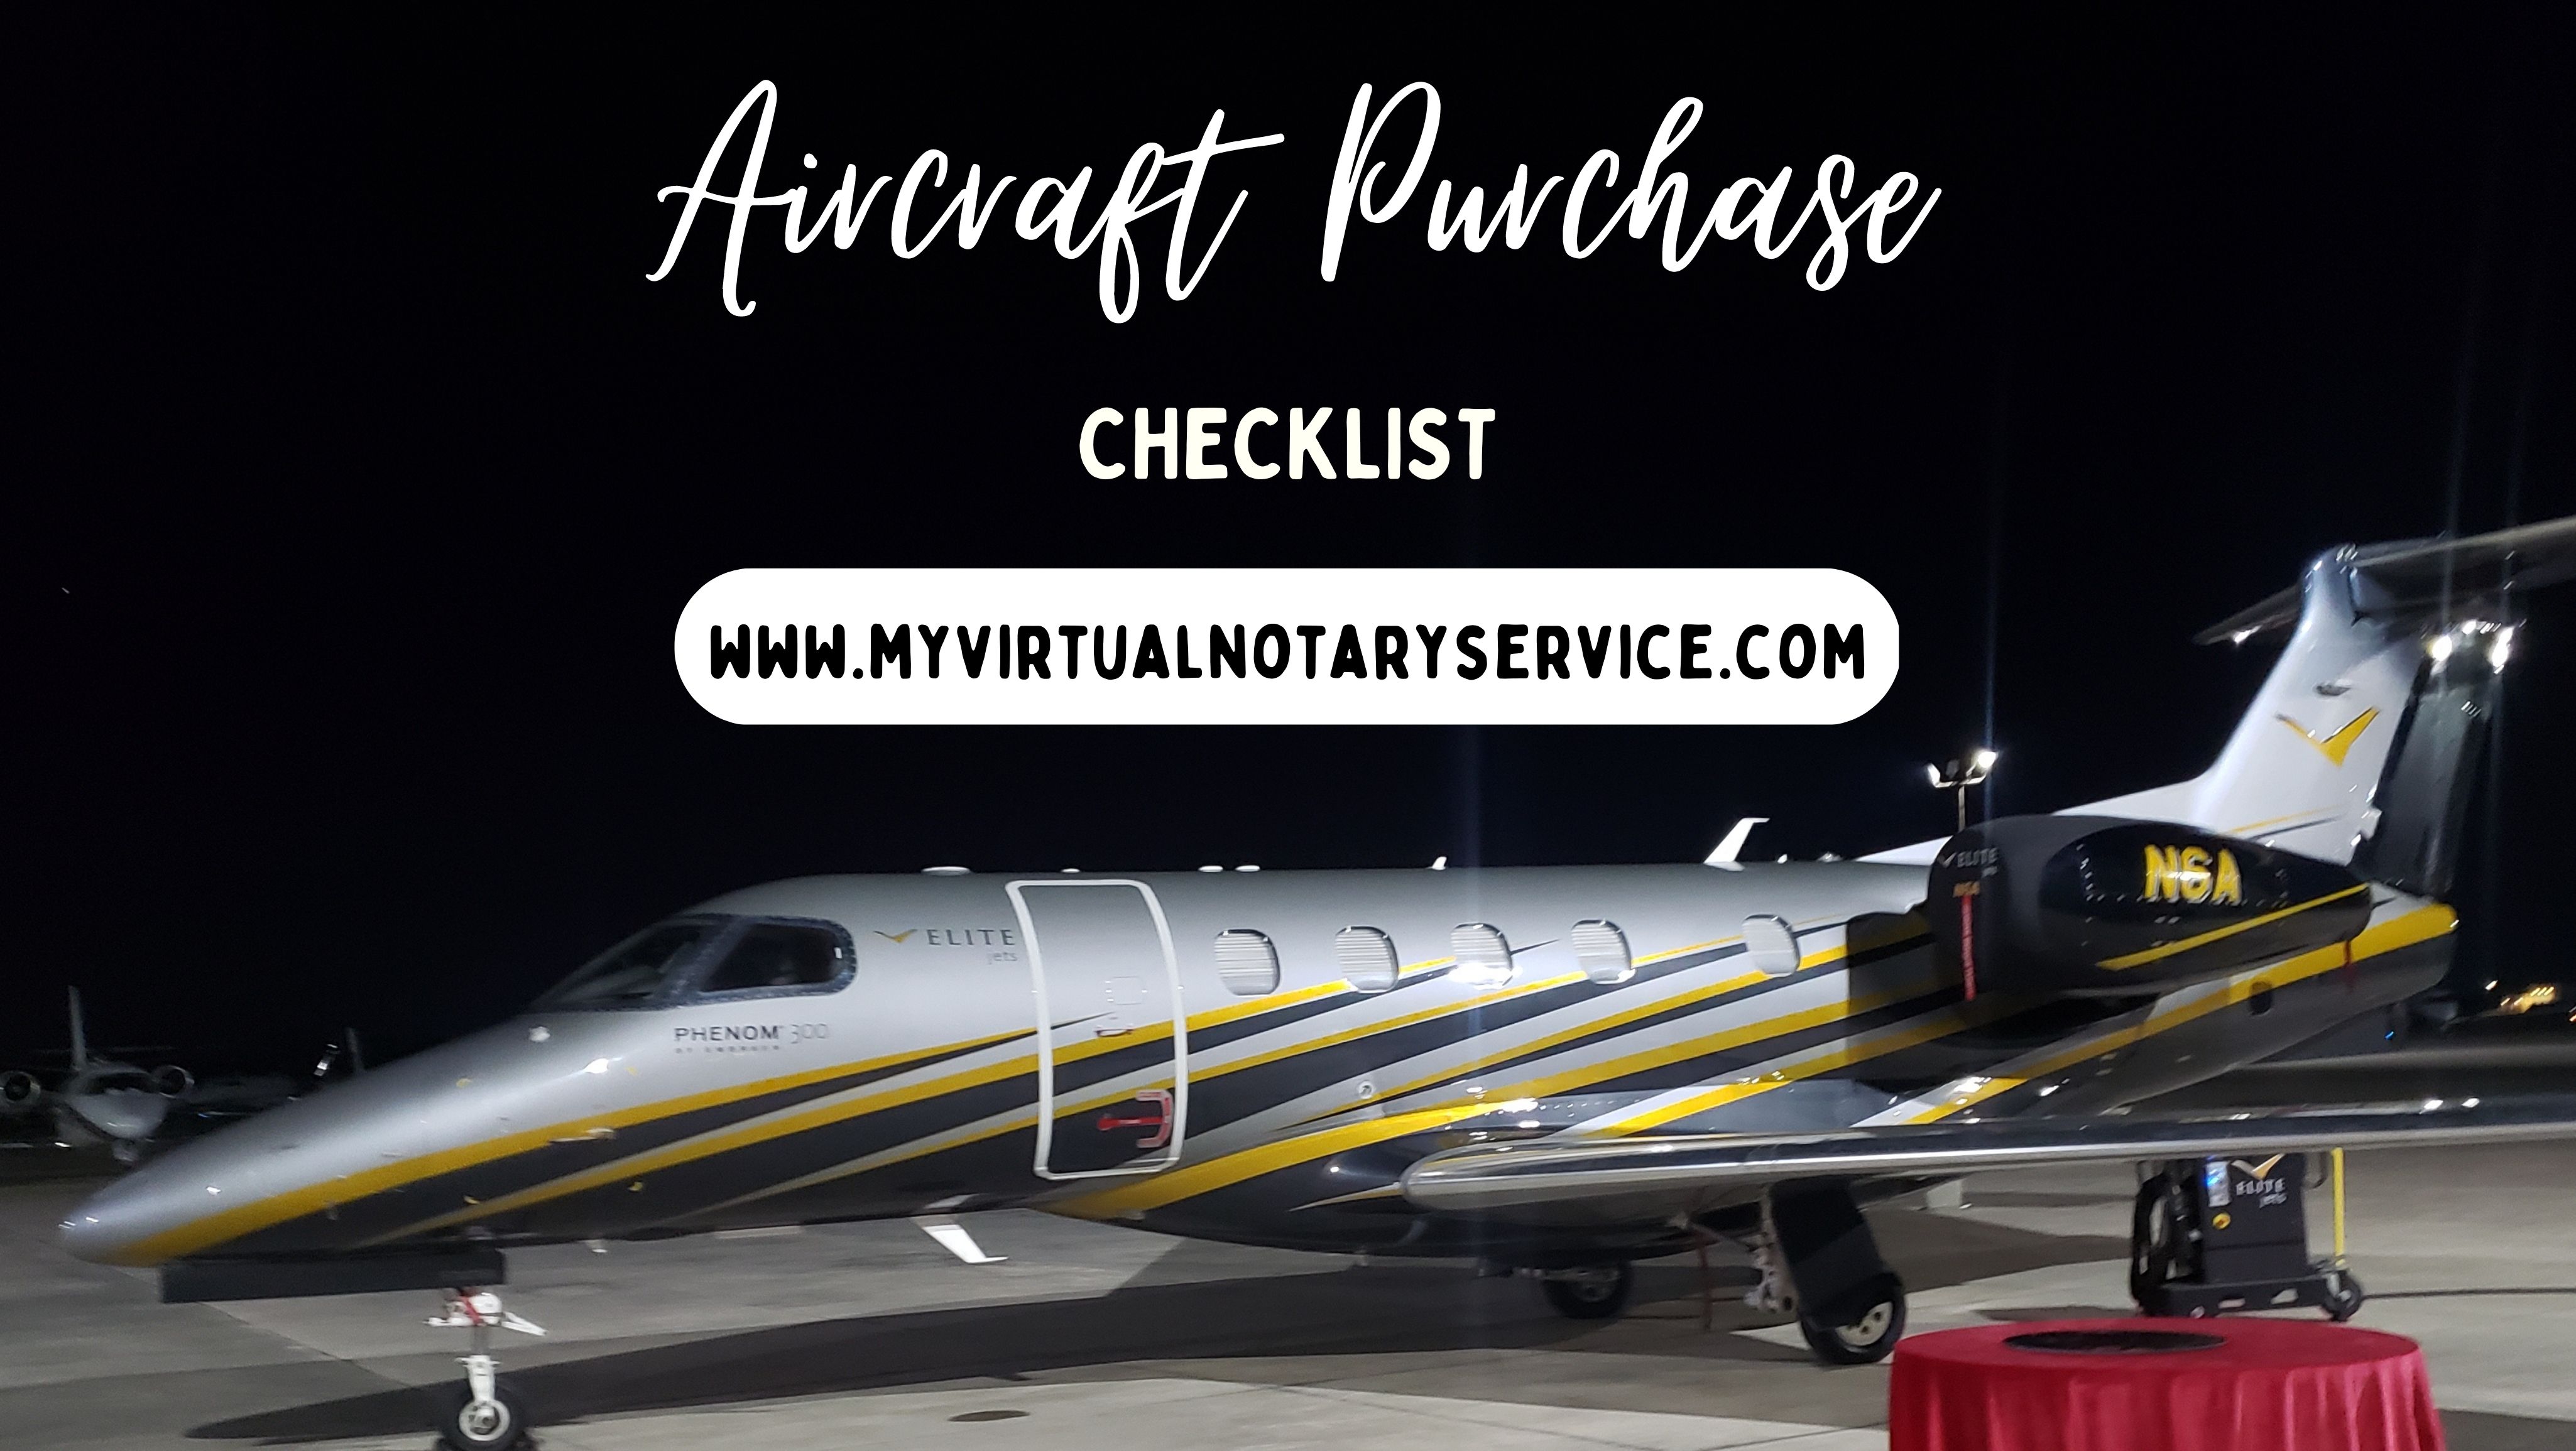 Jet, airplane hanger with the words Aircraft Purchase Checklist